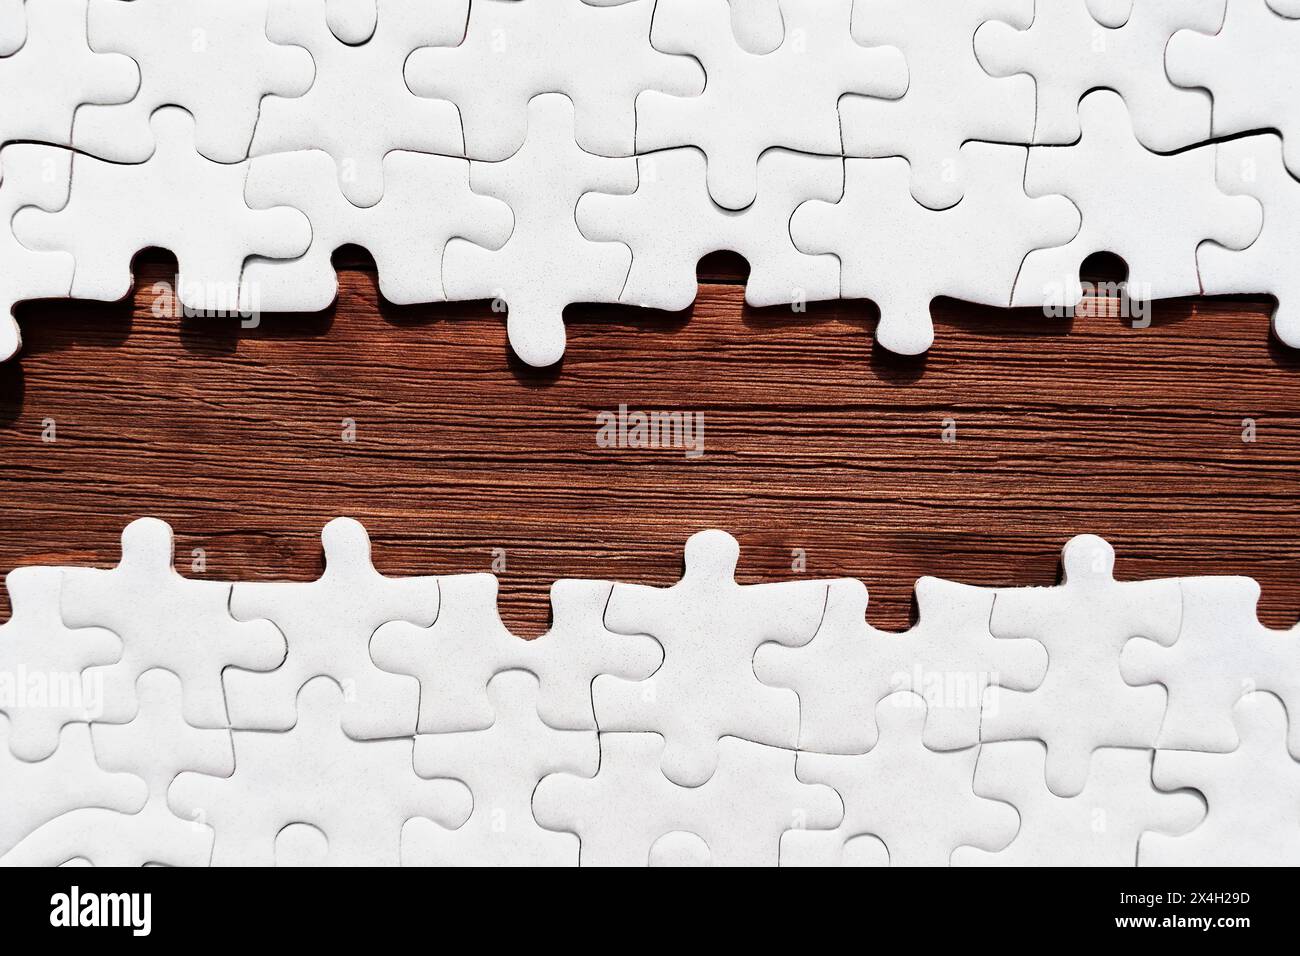 Close-up view of a white blank puzzle with a row of missing pieces, offering a glimpse of a rustic wooden background behind. Stock Photo